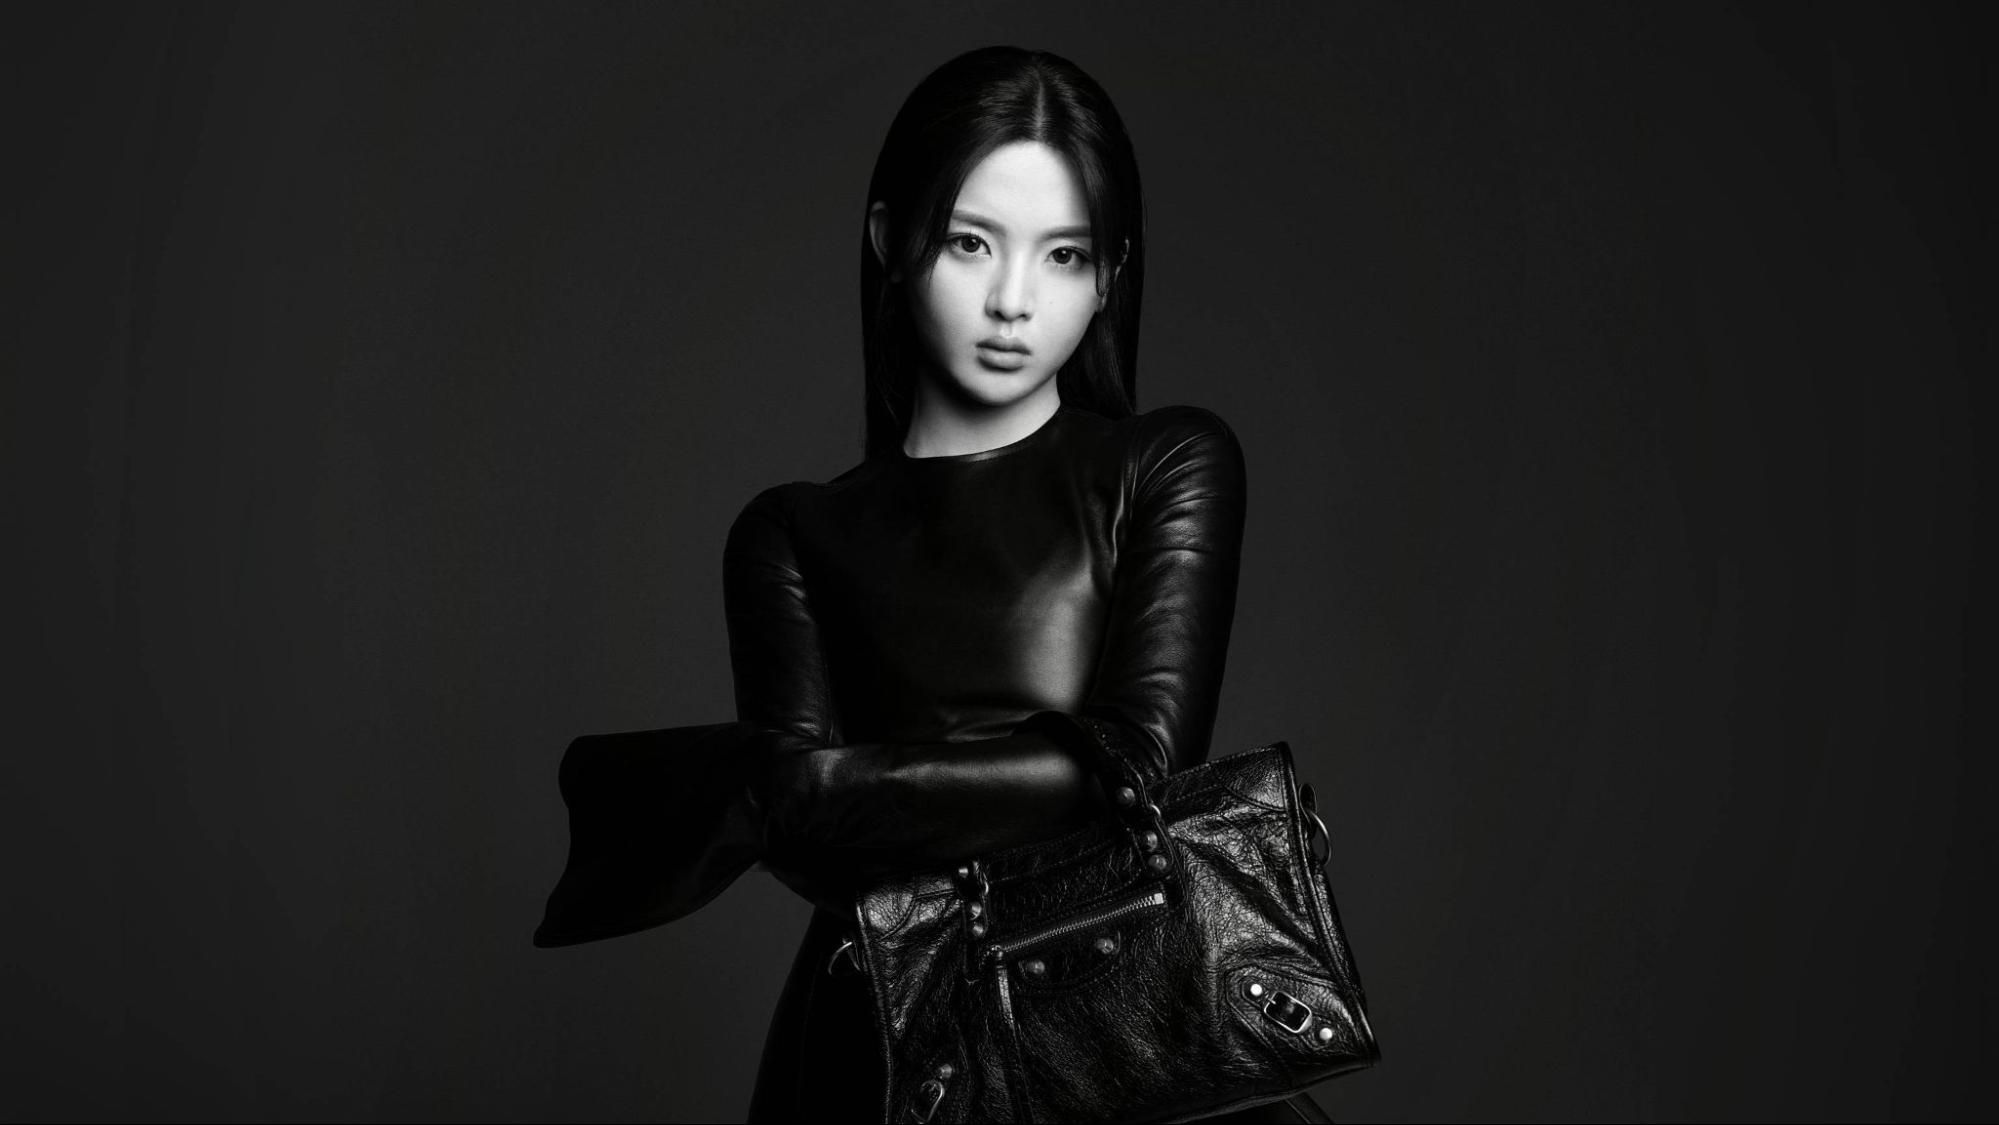 Balenciaga’s Le City revival sparks nostalgia with Yang Chaoyue, Kate Moss